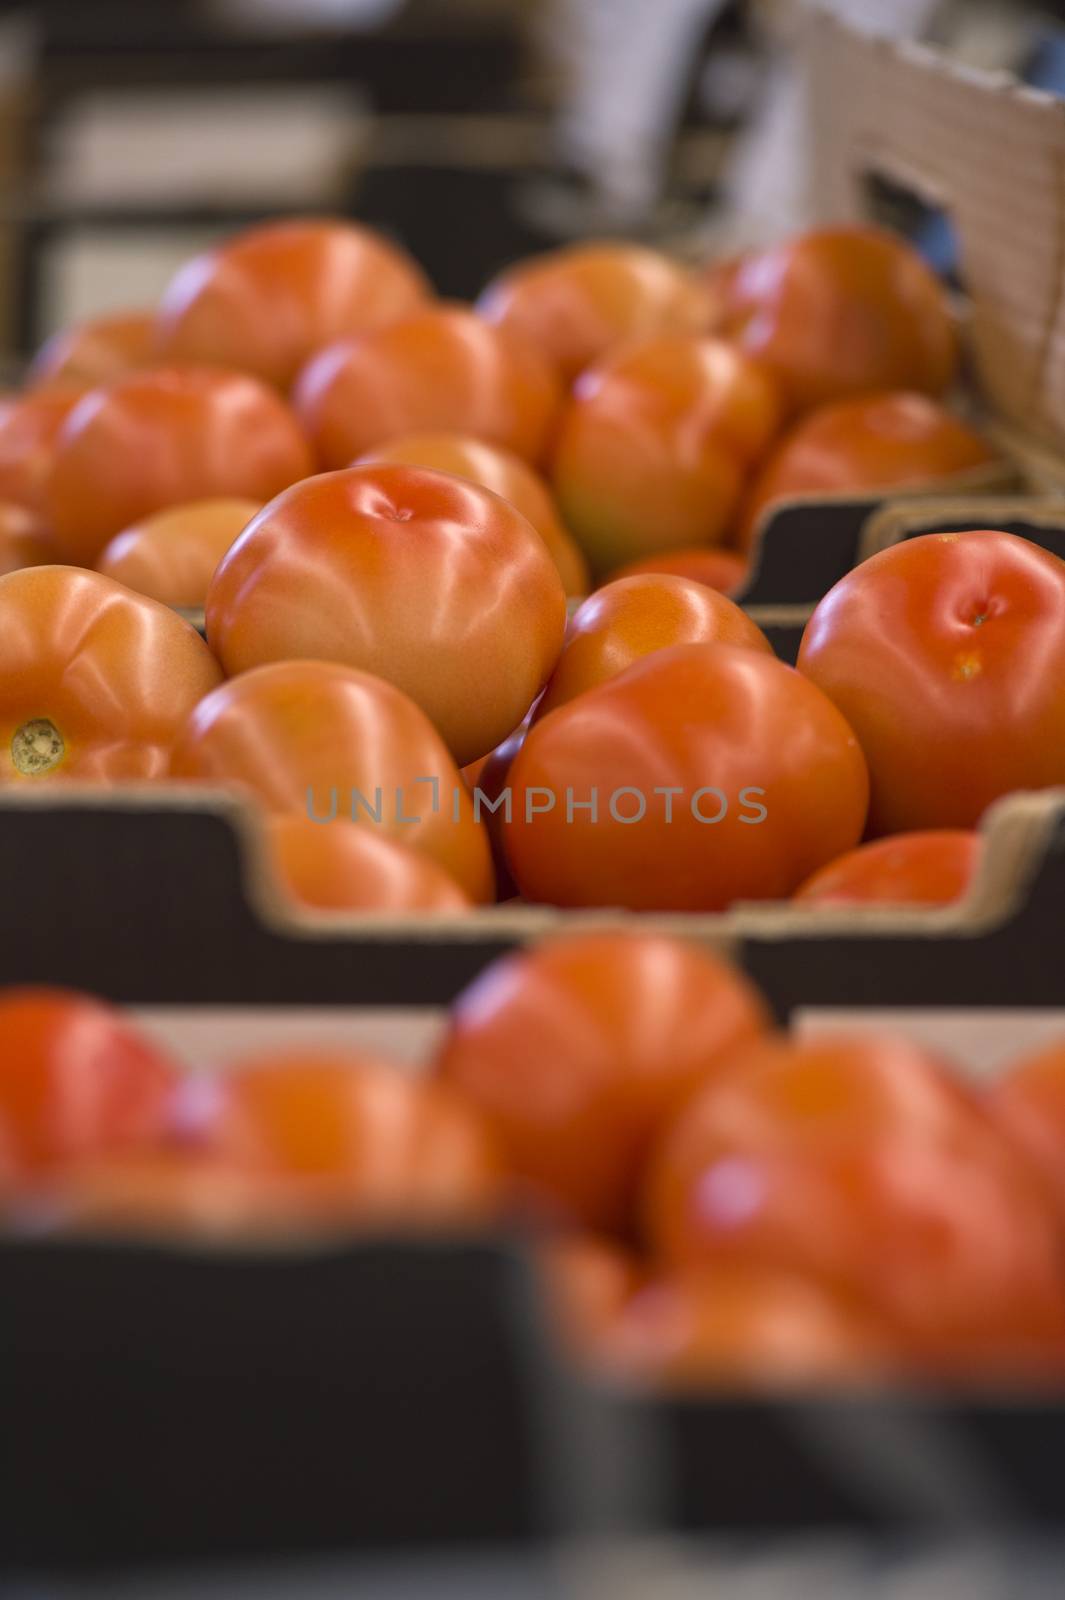 Fresh Tomatoes in the factory packaged and boxed ready for transportation to the market